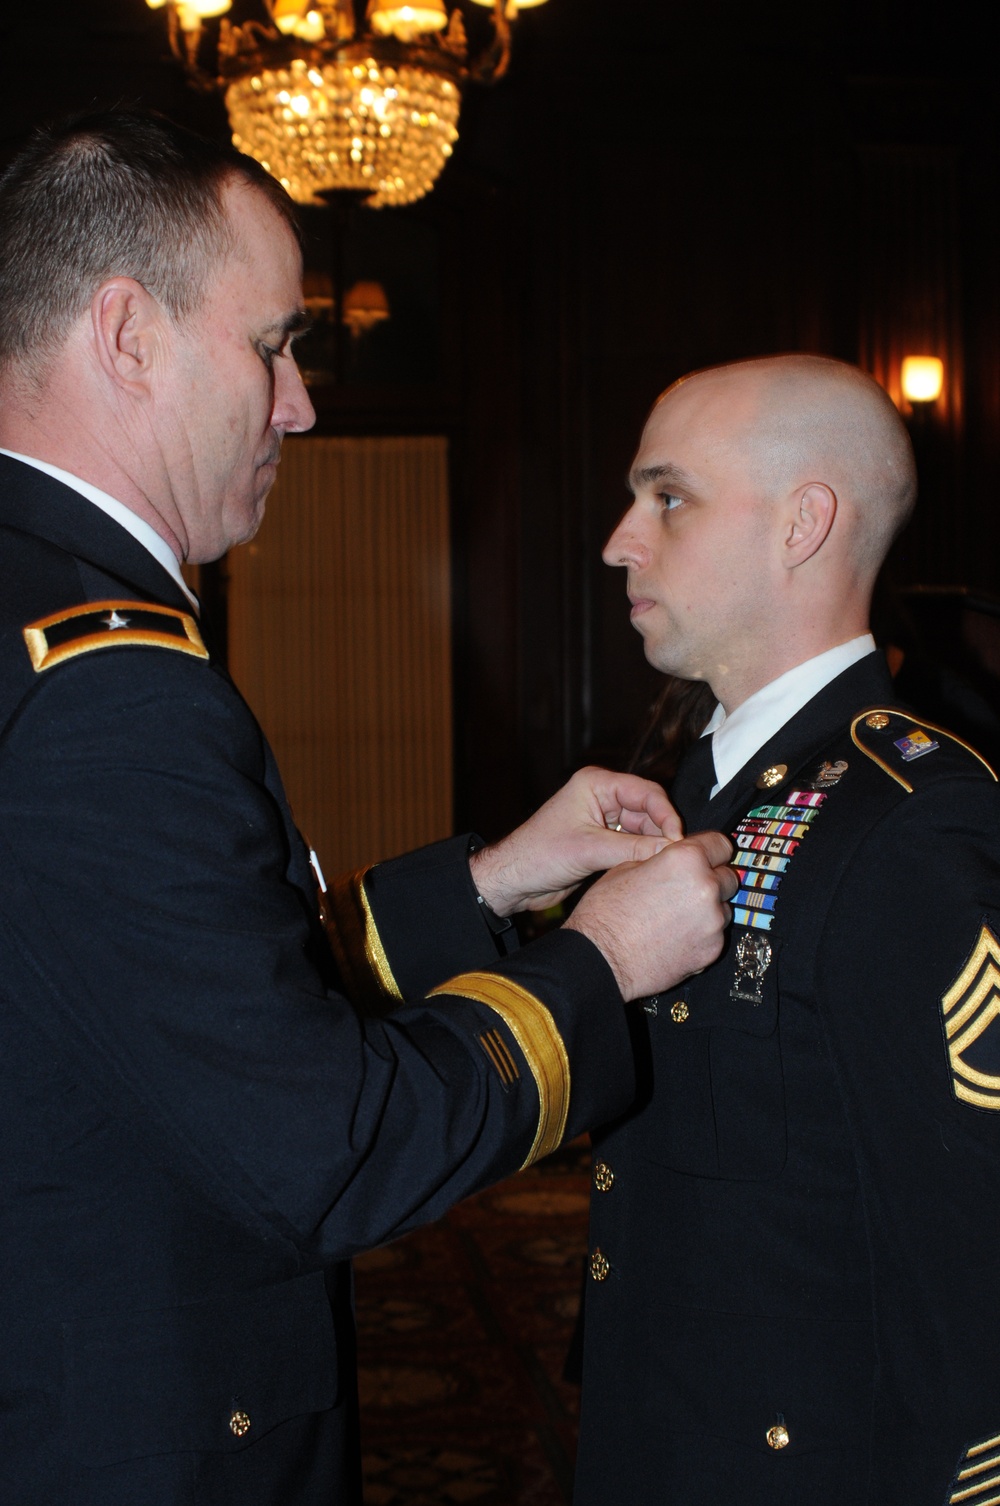 2019 Catto medal awarded to Pa. Guardsmen